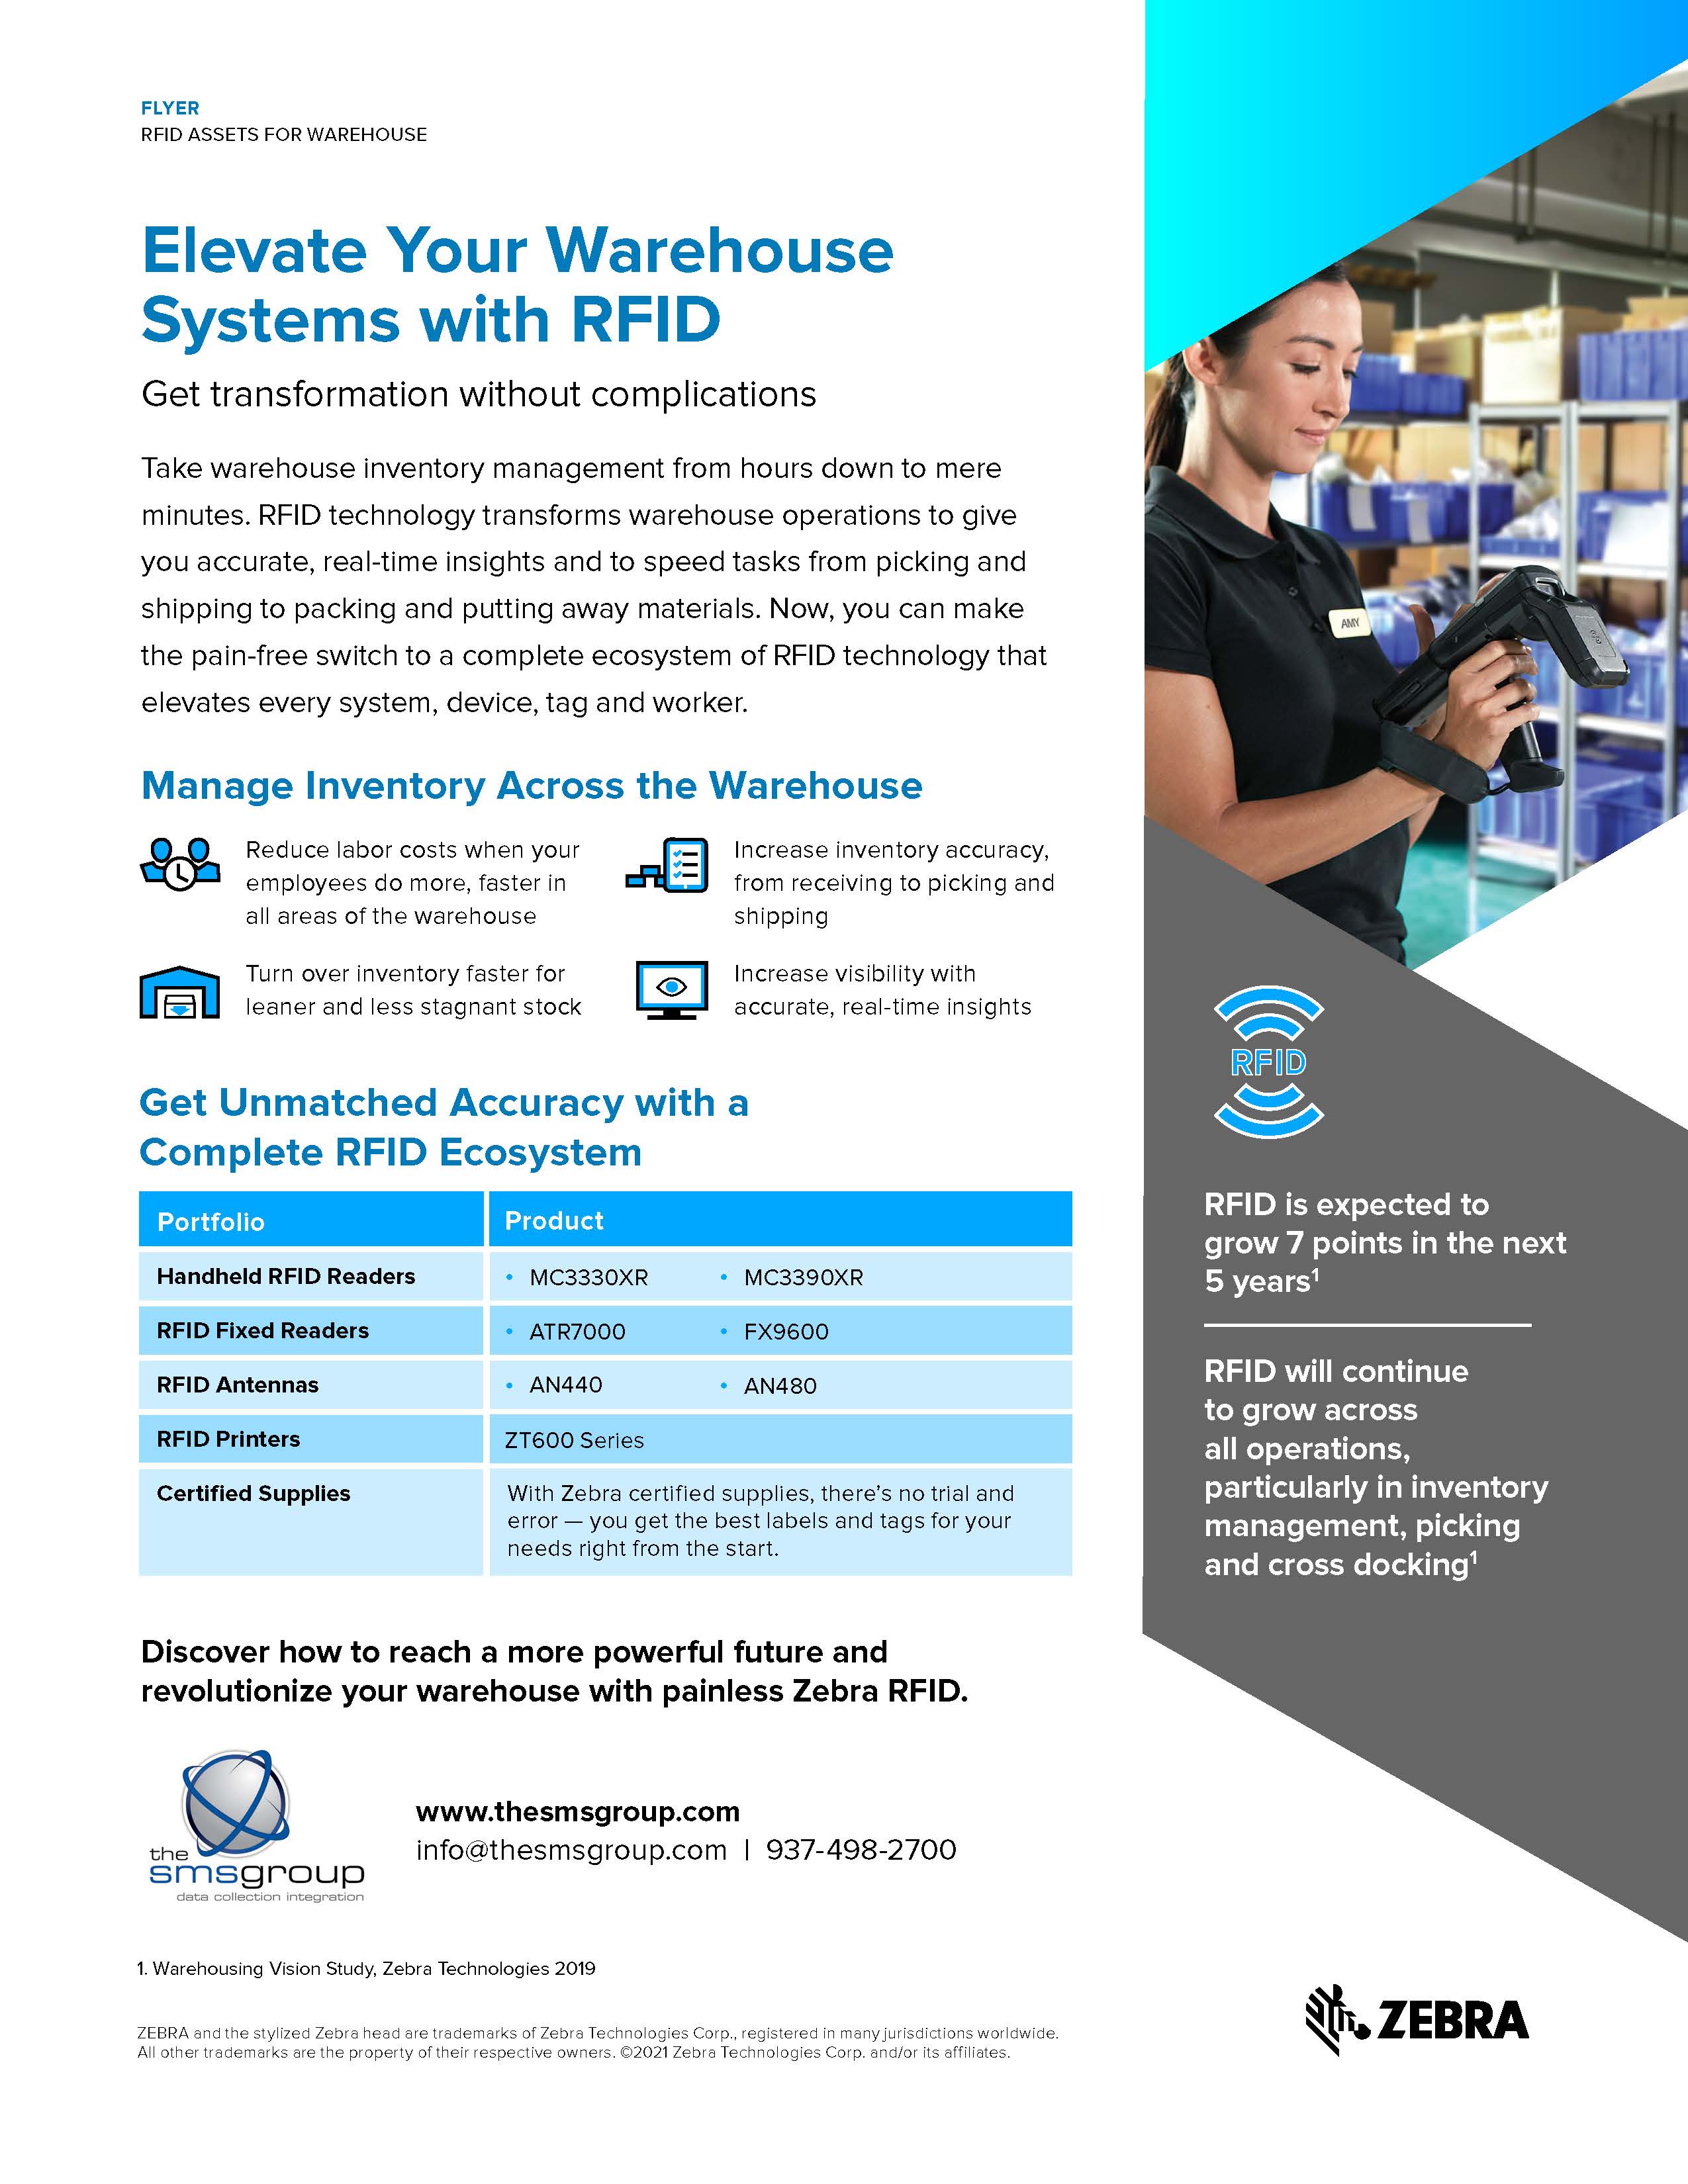 SMS Group - Elevate Your Warehouse Systems with RFID